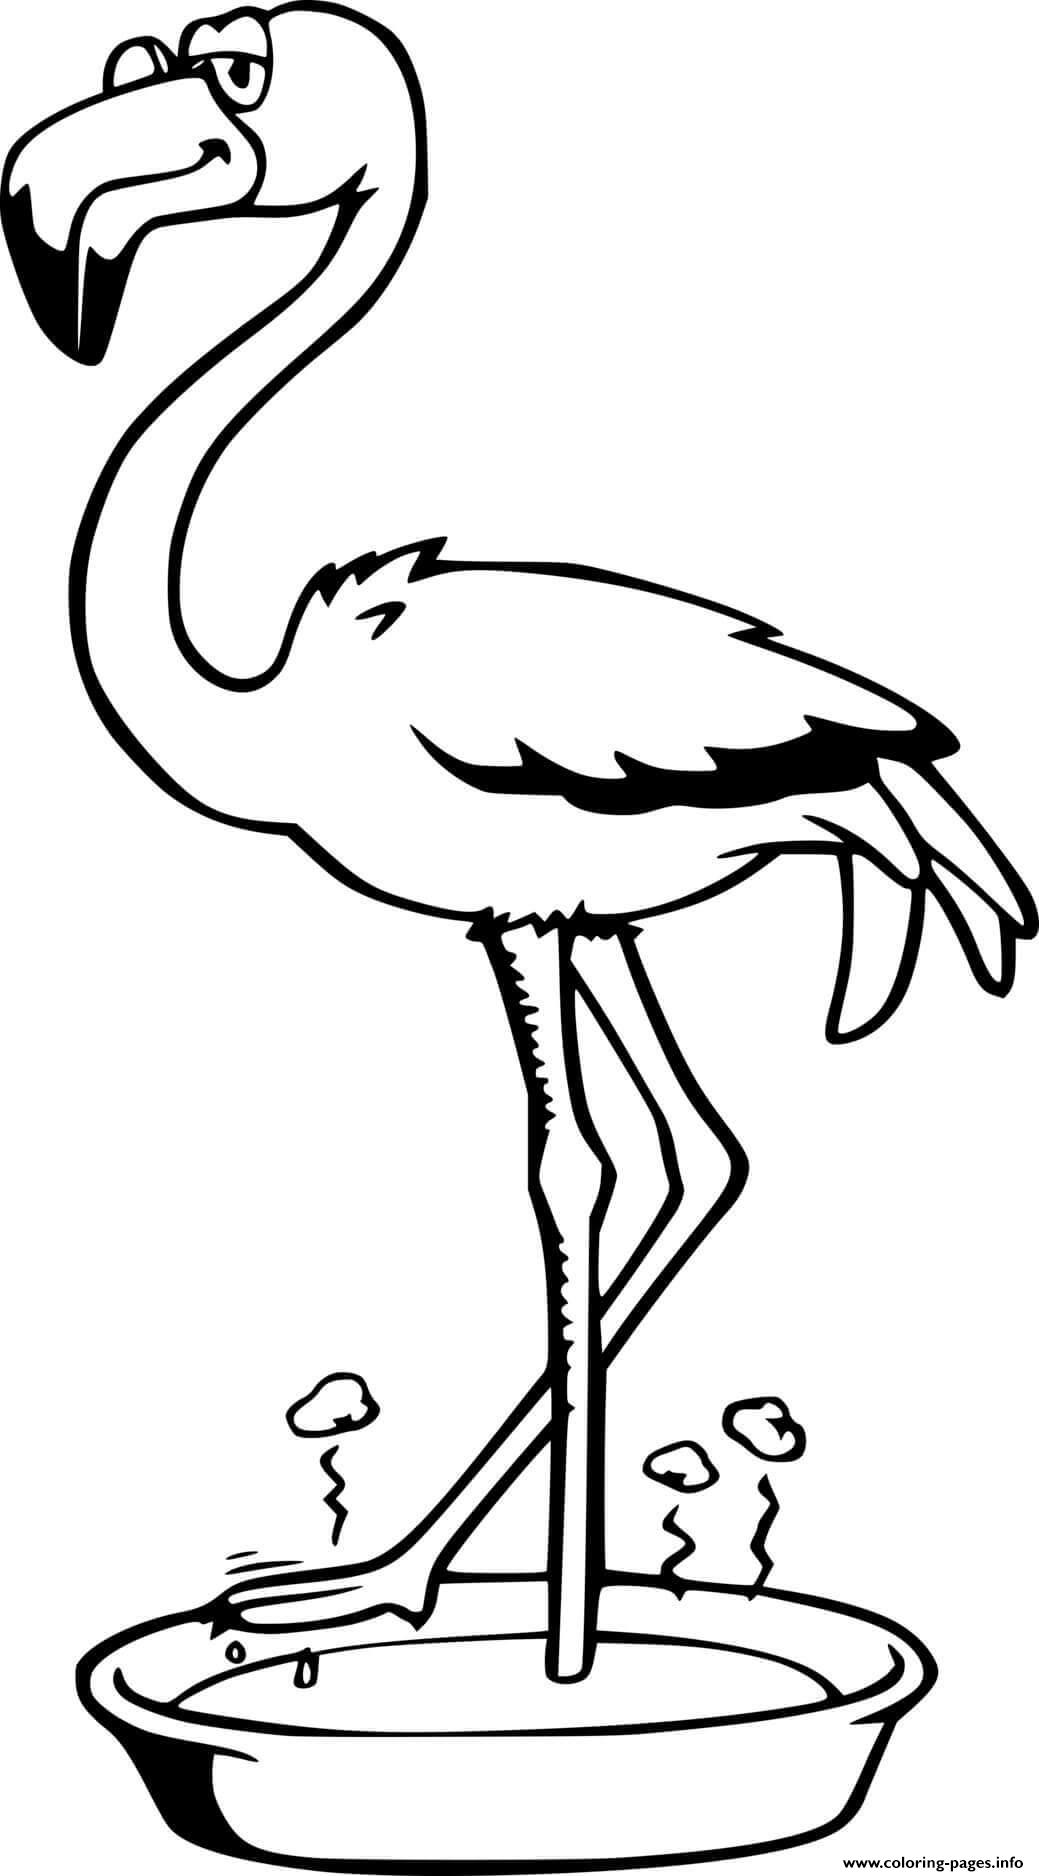 Flamingo Standing In The Basin coloring